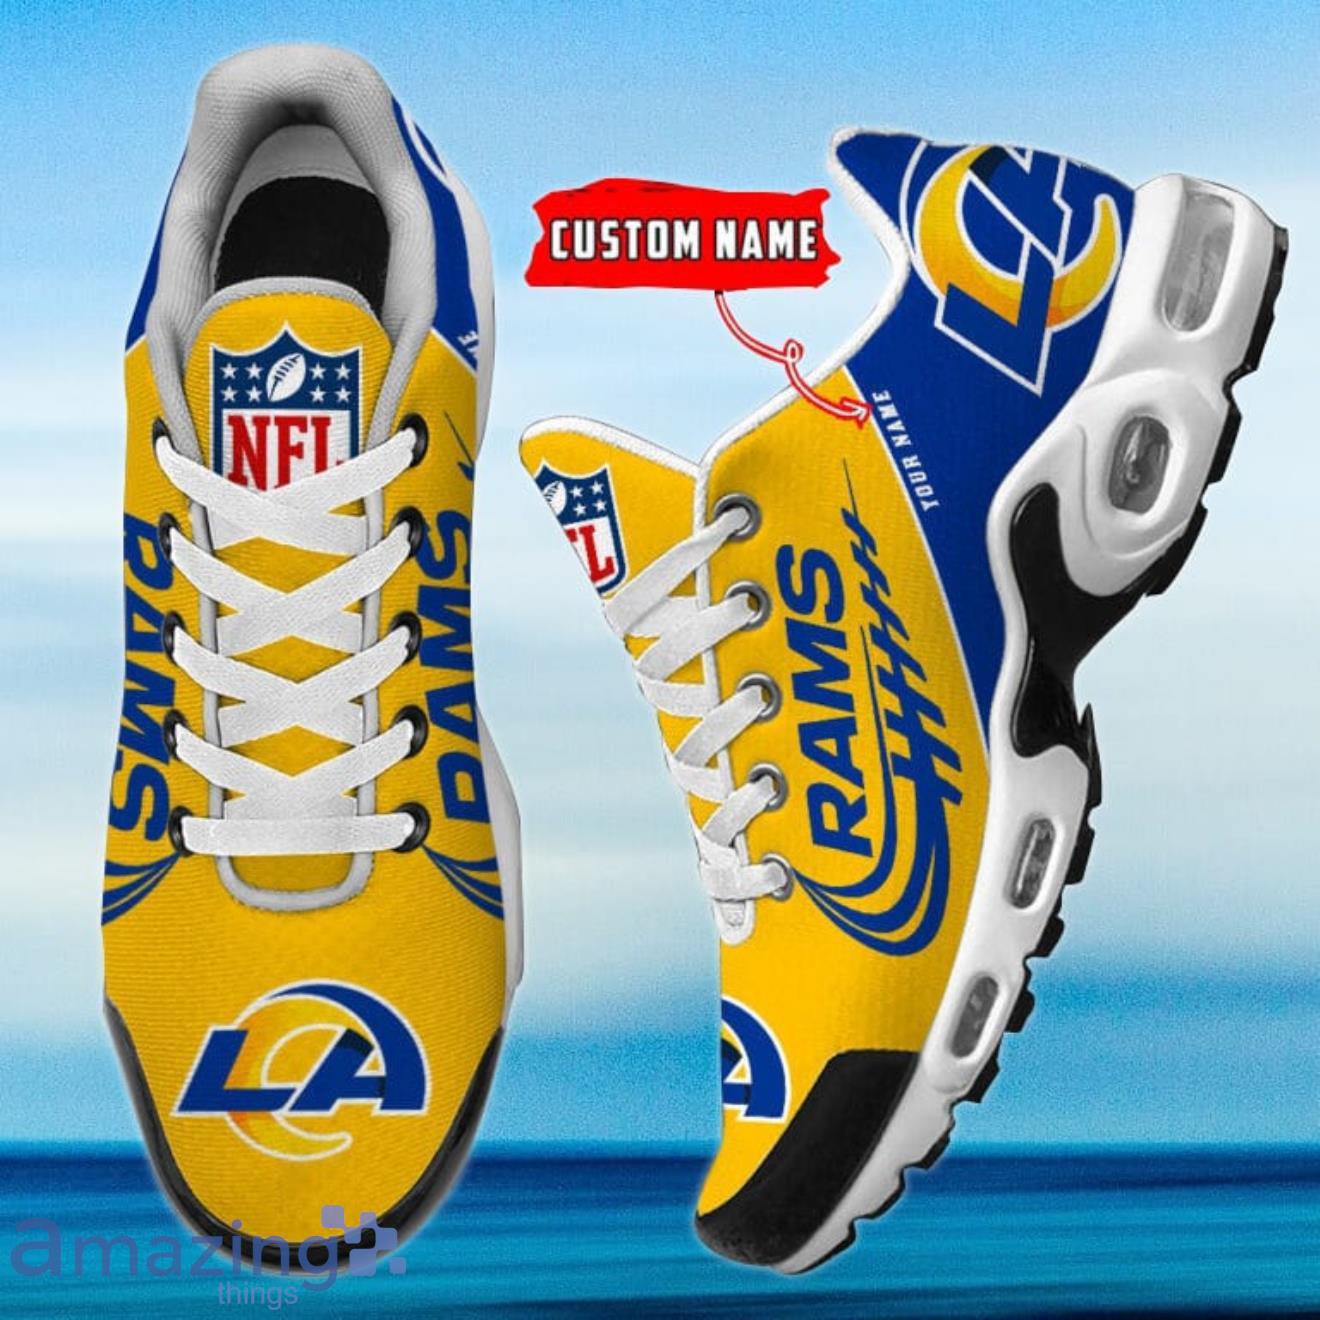 Nike LA on X: One of one. Limited edition, hand-crafted LA Rams